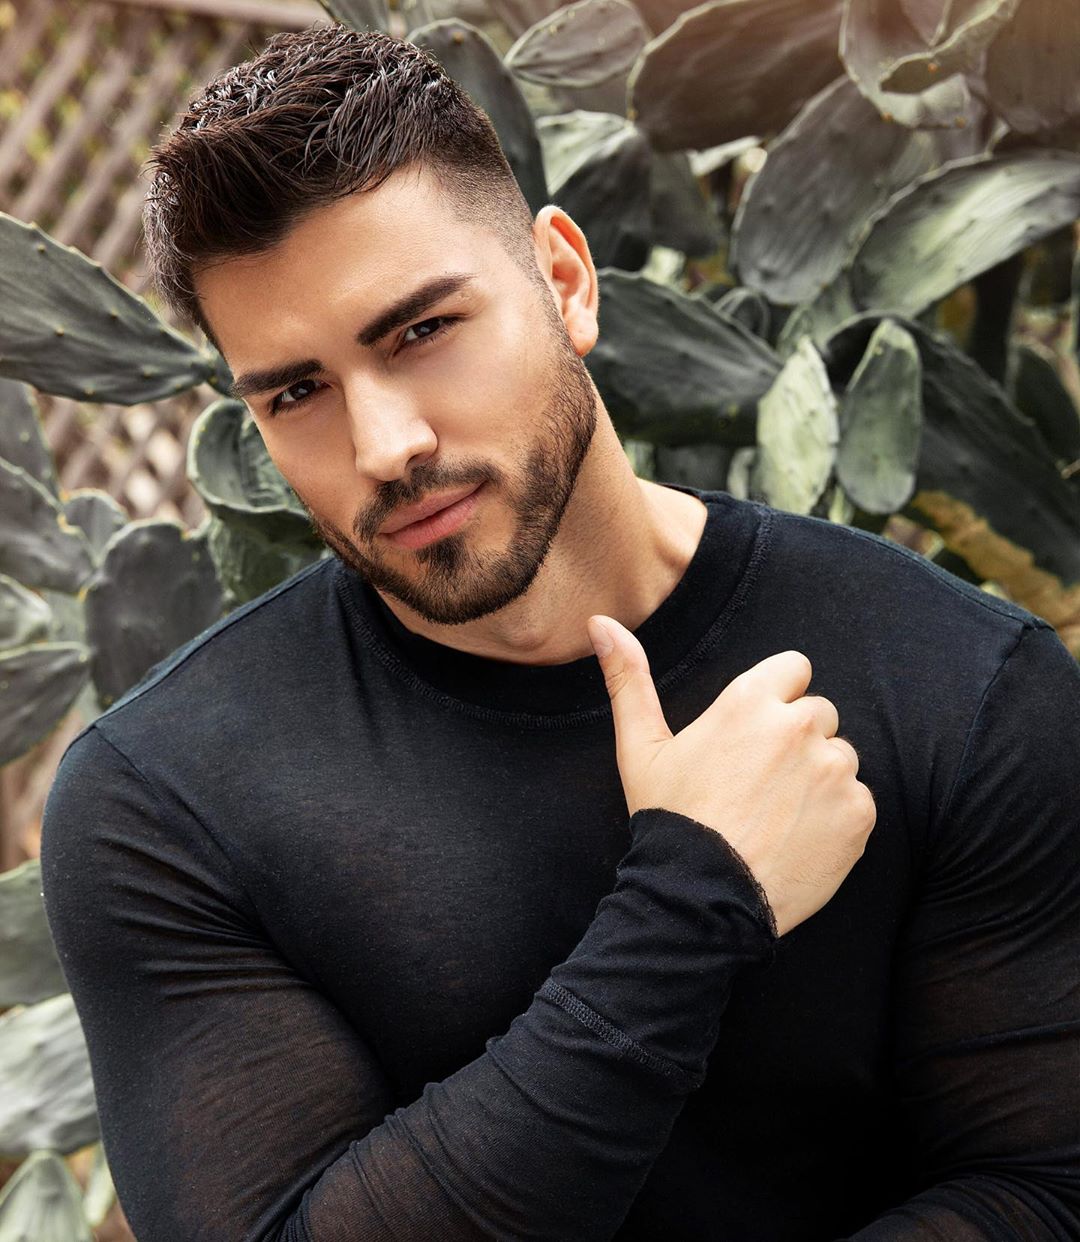 most-beautiful-men-in-the-world-mario-rodriguez-jr-sexy-male-latinos-thumbs-up